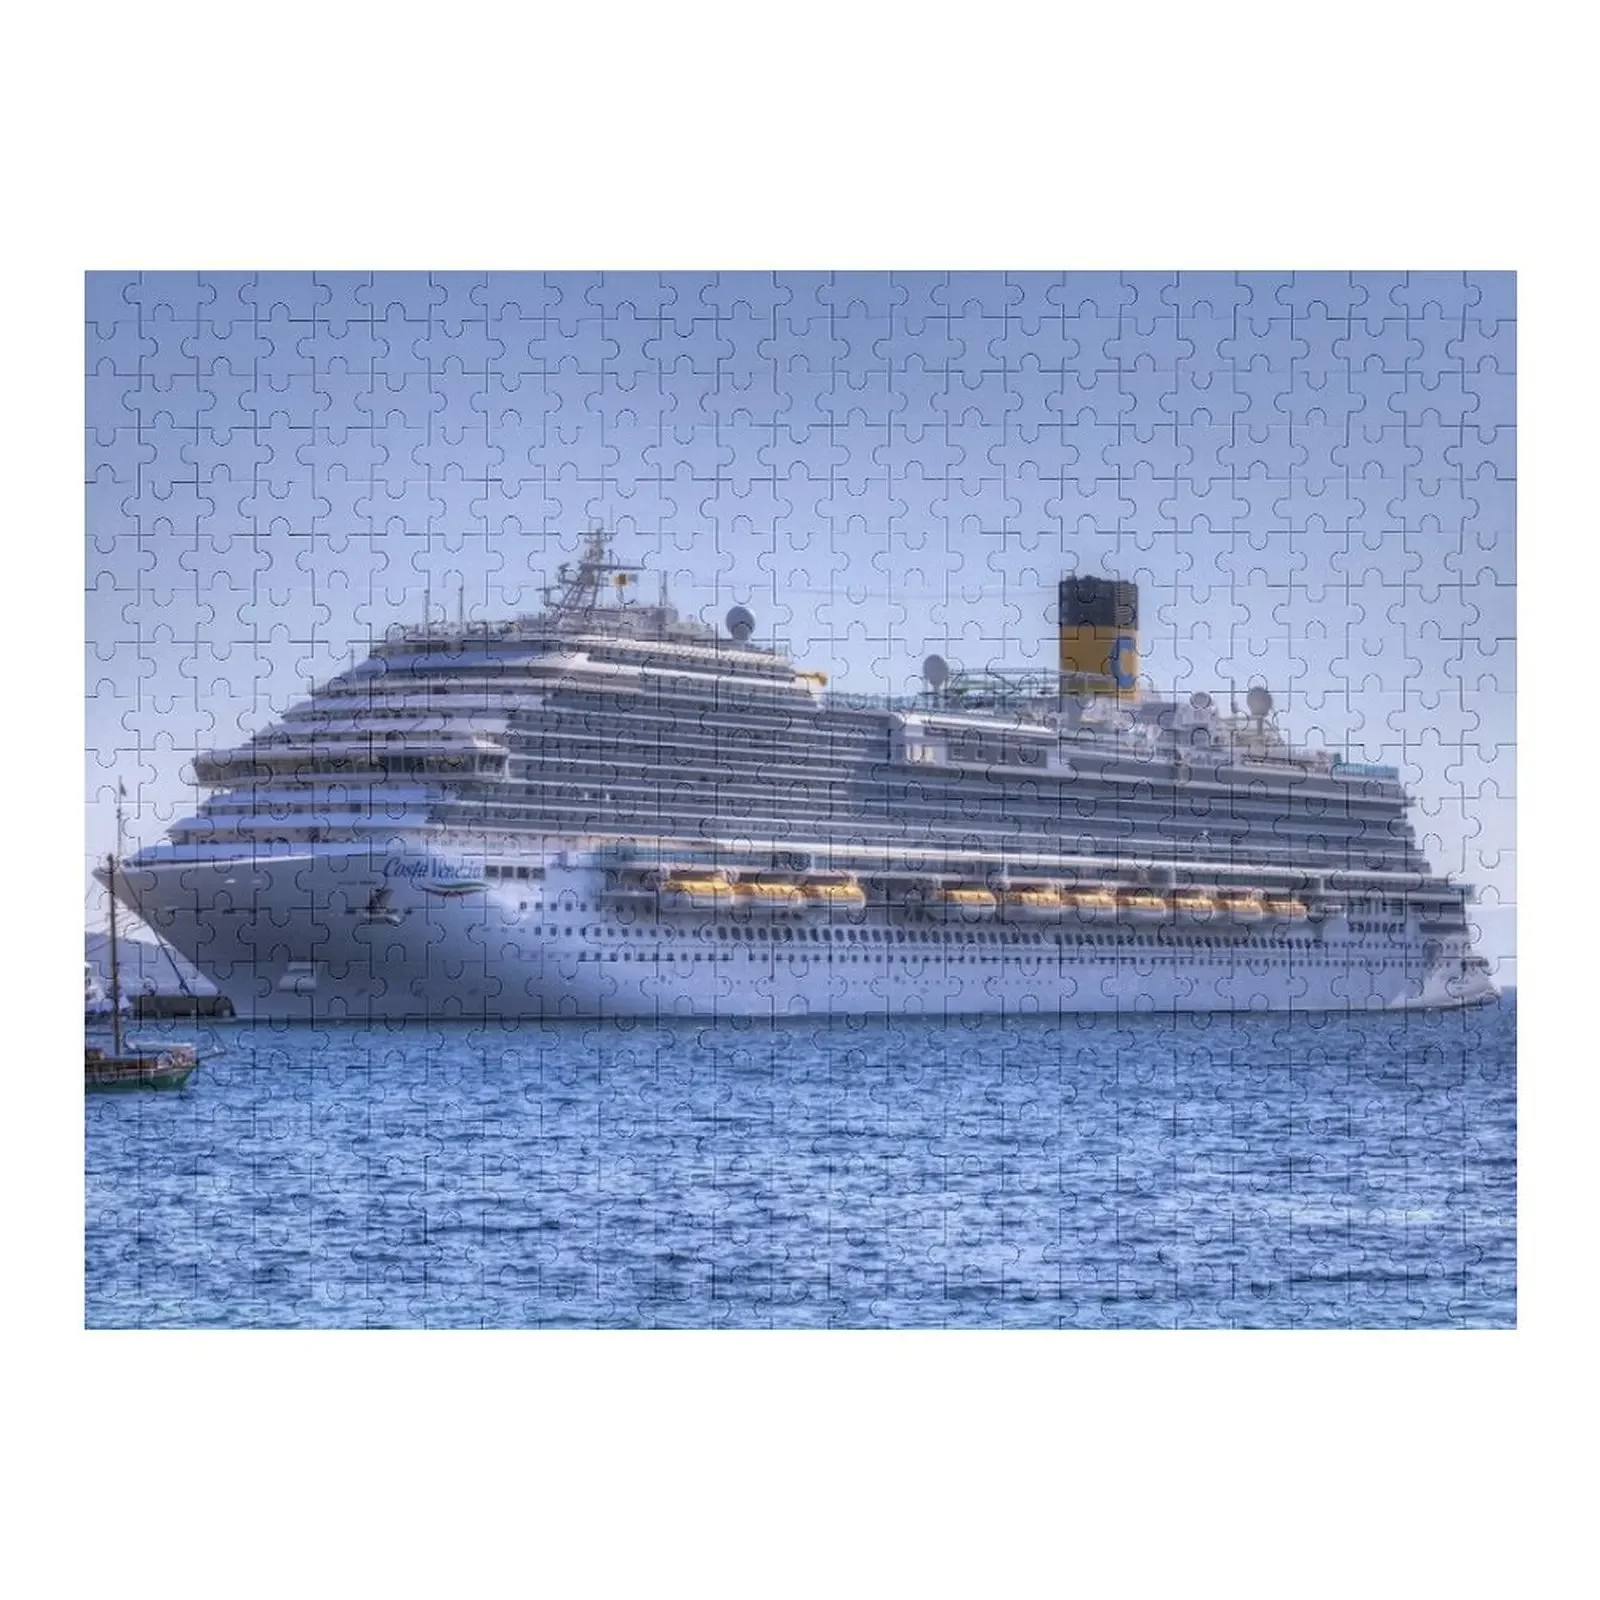 Luxury Cruise Ship Jigsaw Puzzle Custom Name Child Toy Personalized Gift Ideas Custom With Photo For Children Puzzle edward hopper cape cod evening 1939 jigsaw puzzle custom name child toy diorama accessories personalized kids gifts puzzle